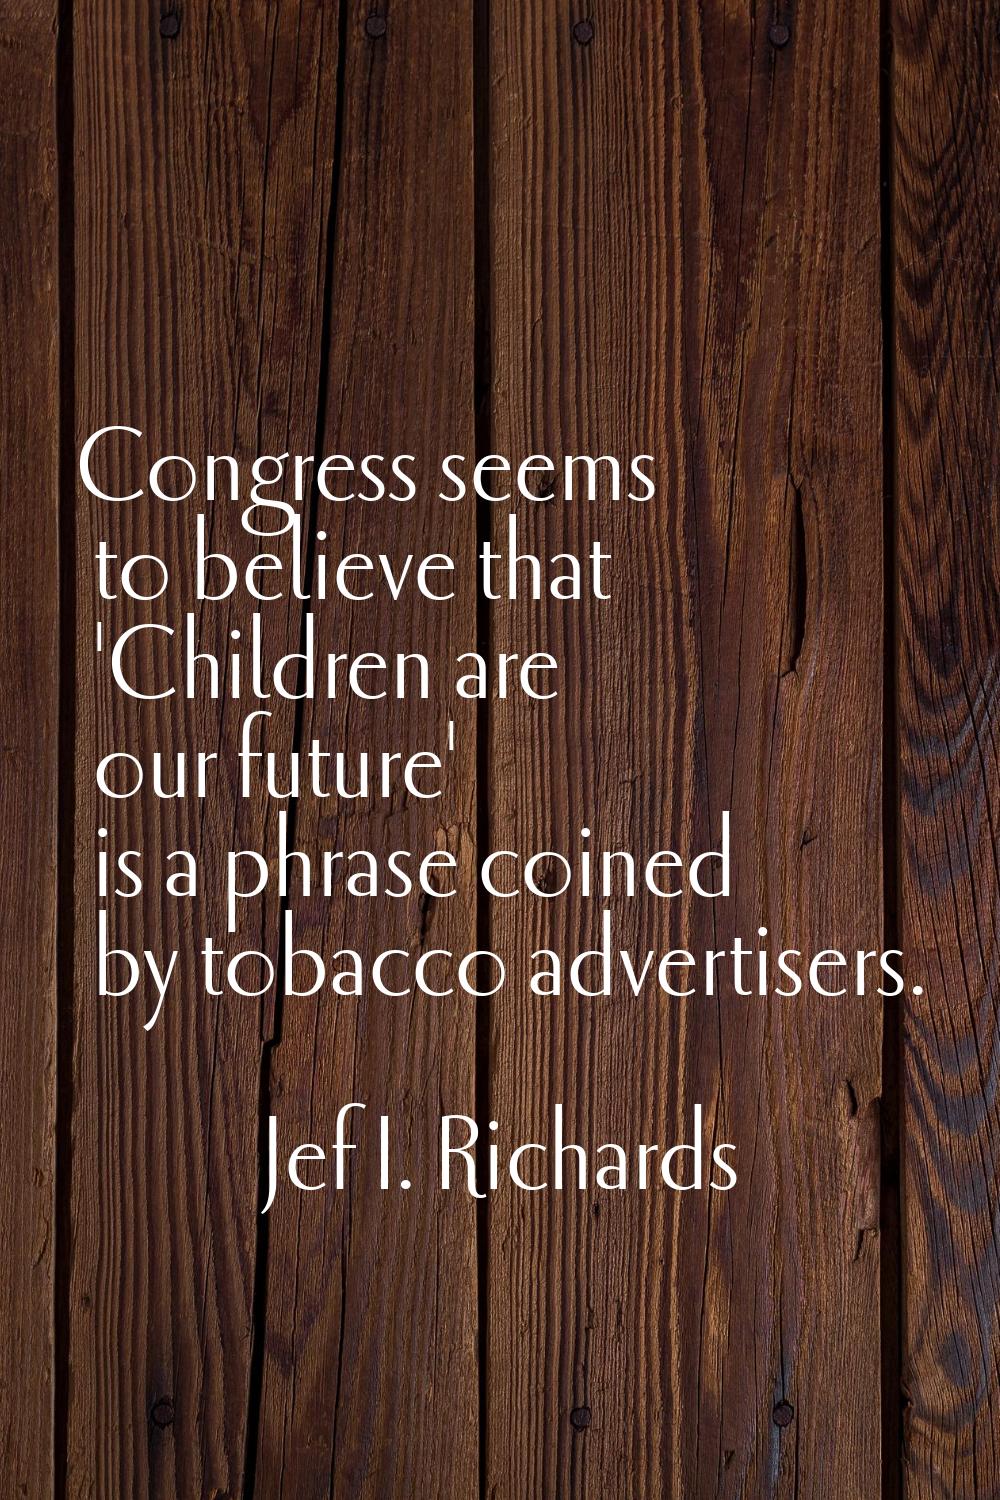 Congress seems to believe that 'Children are our future' is a phrase coined by tobacco advertisers.